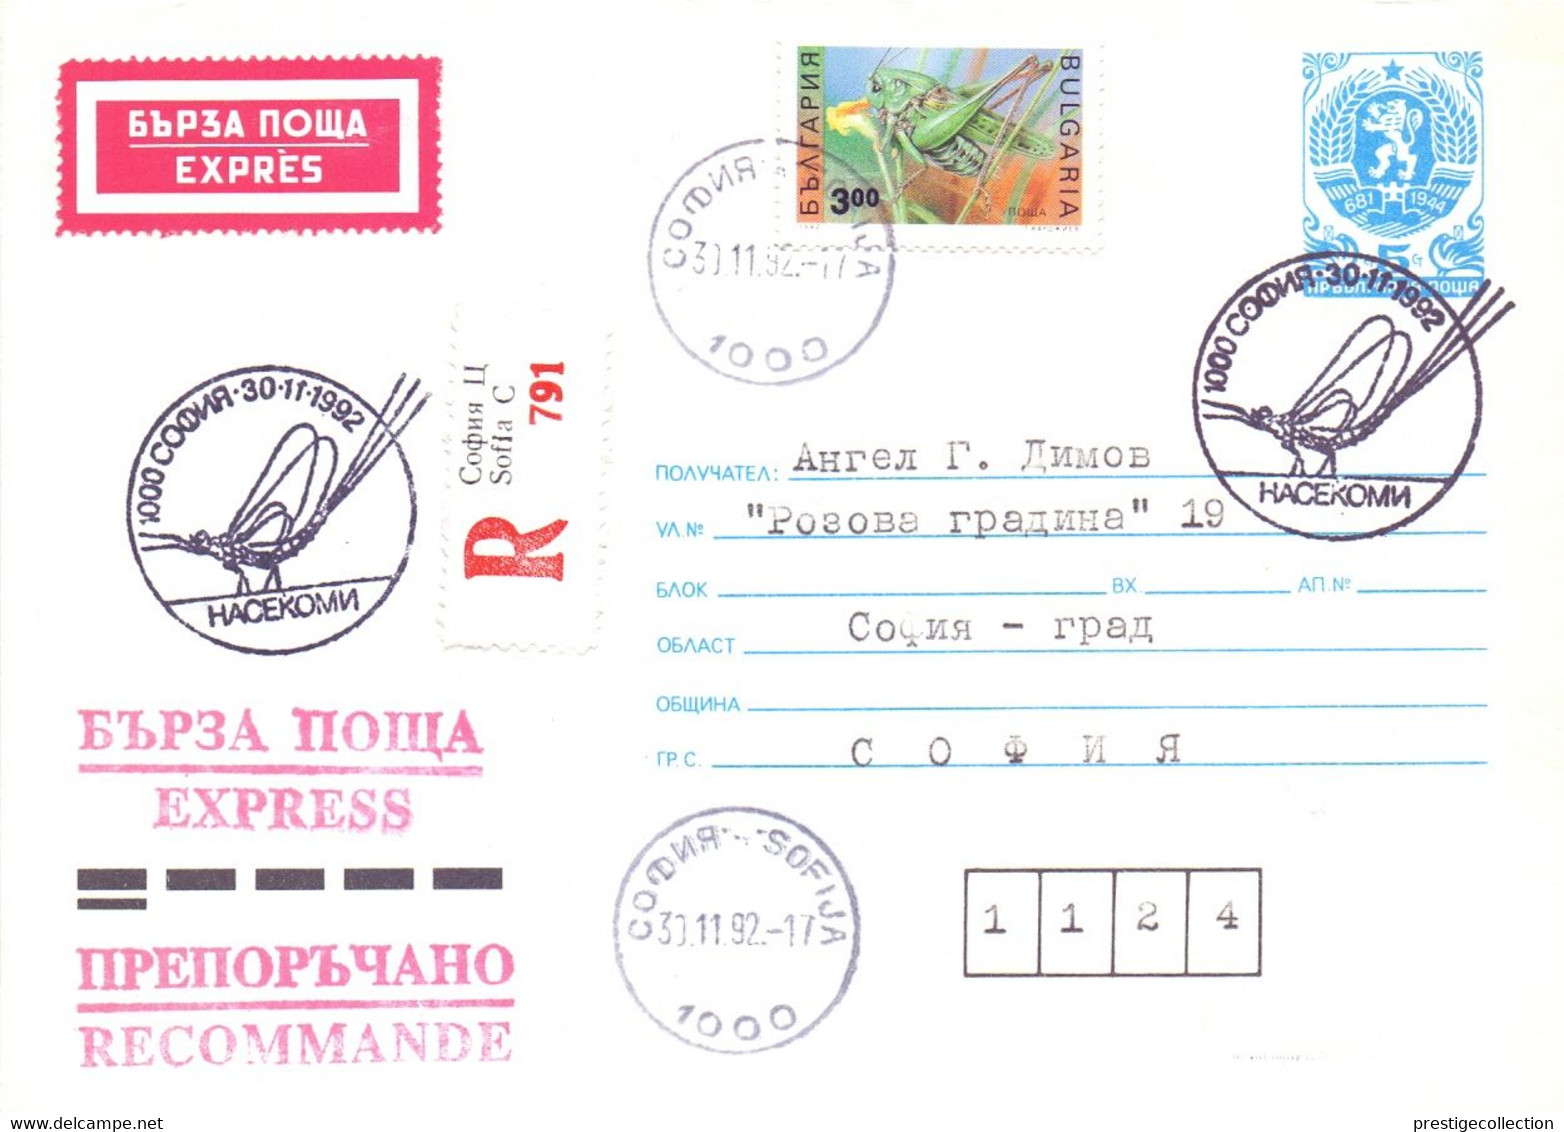 BULGARIA EXPRES  END REGISTRED MAIL 1992  POST MAIL  COVER    (OTT200139) - Express